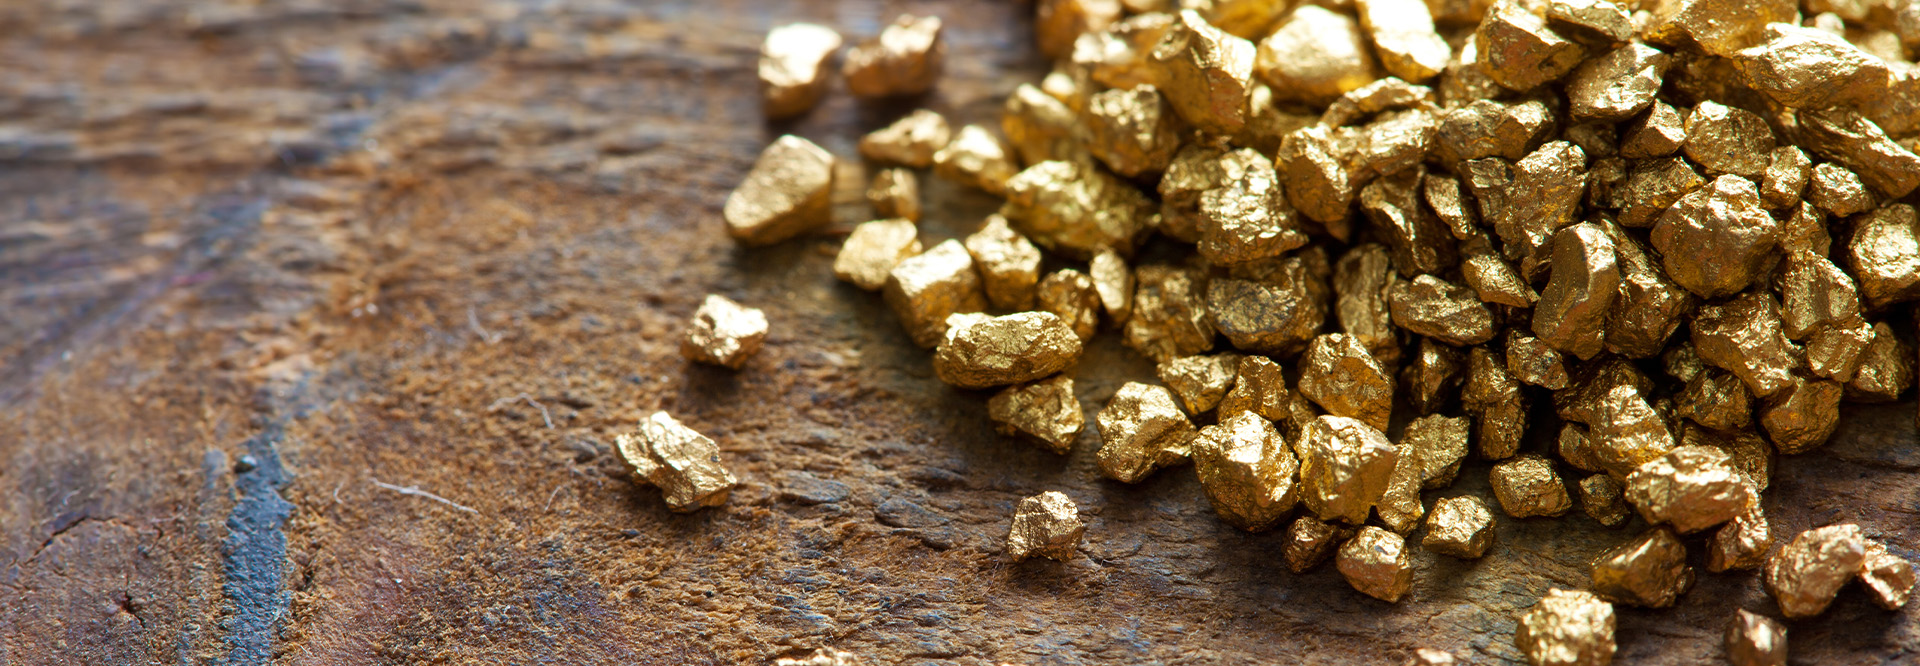 Gold nuggets (photo)